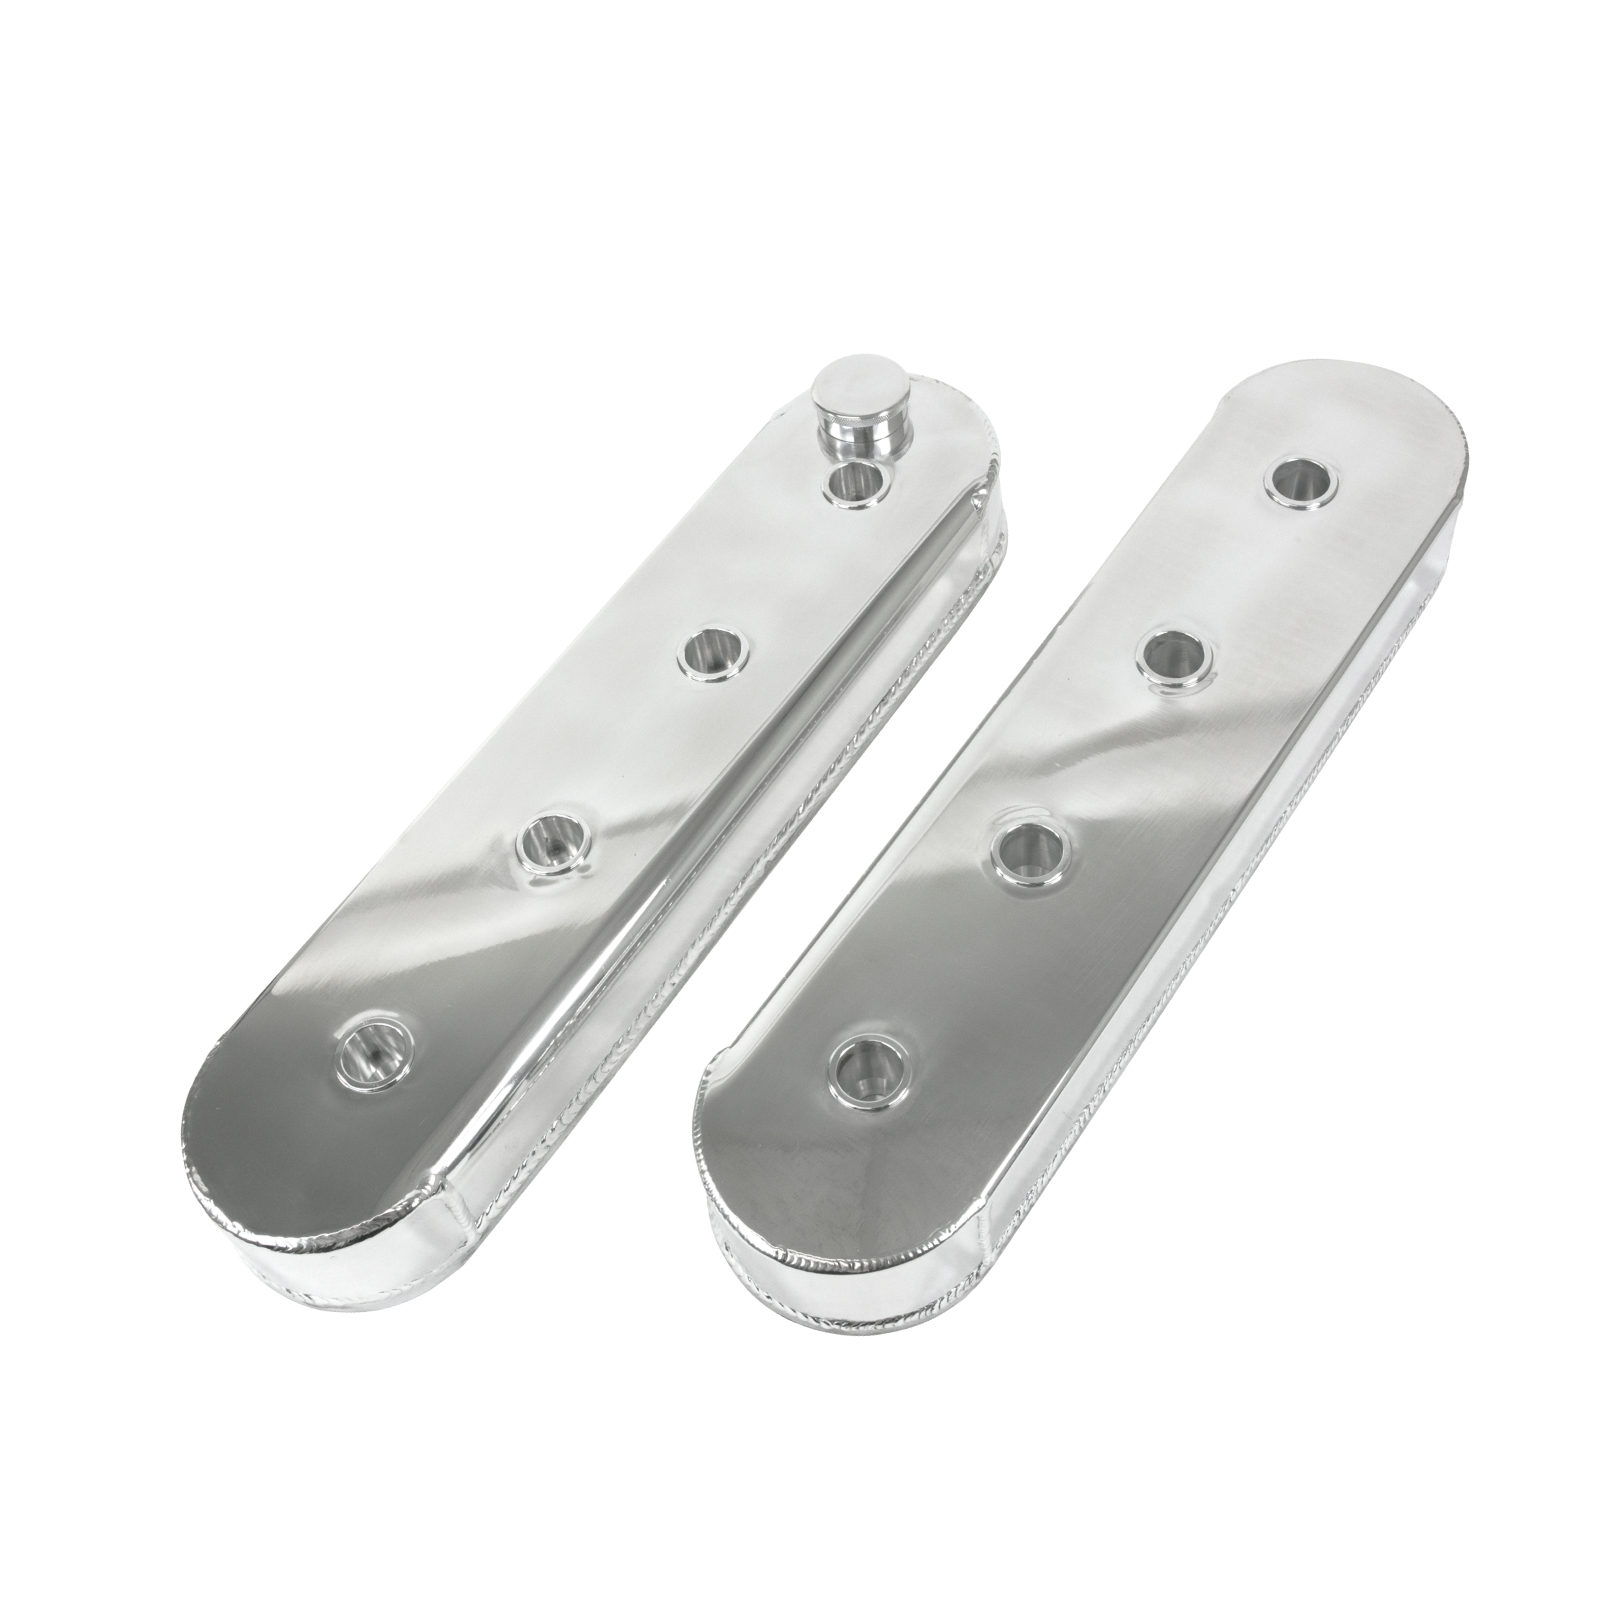 GM LSX V8 (4.8L-7.0L) Polished Fabricated Aluminum Valve Covers without Coil Bracket Mounts